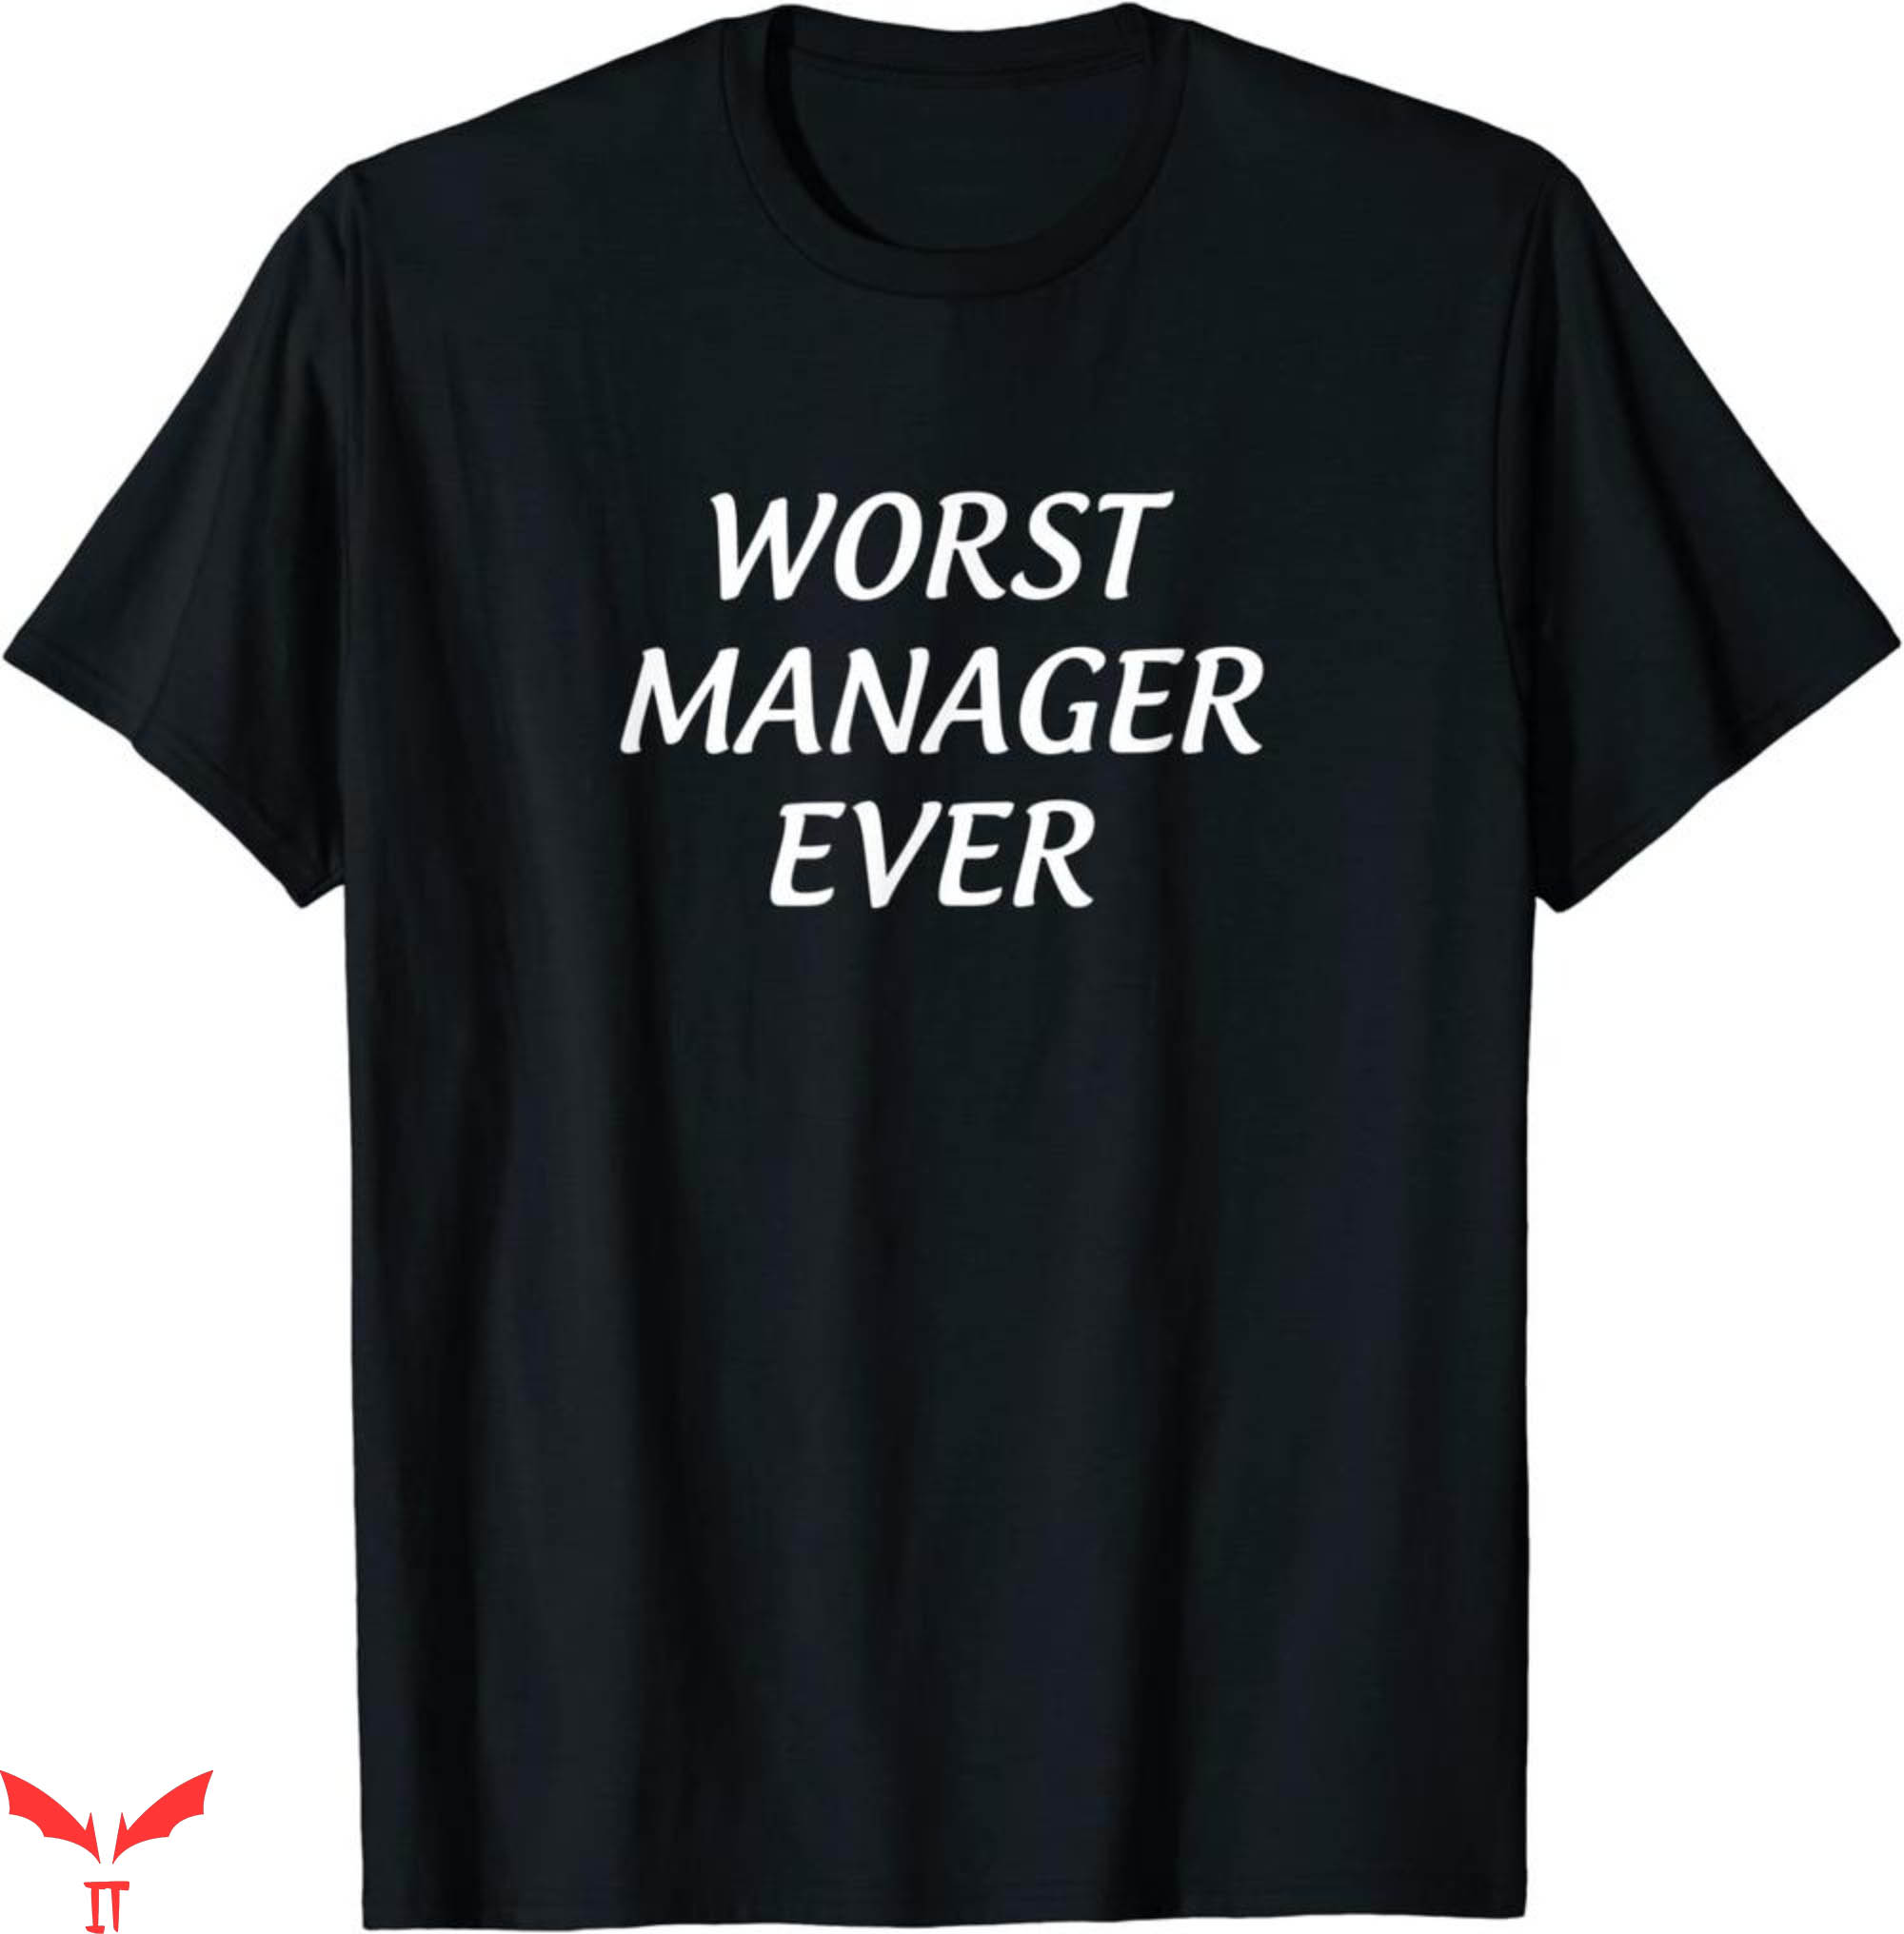 Worst T-Shirt Worst Manager Ever Funny Quote Trendy Tee